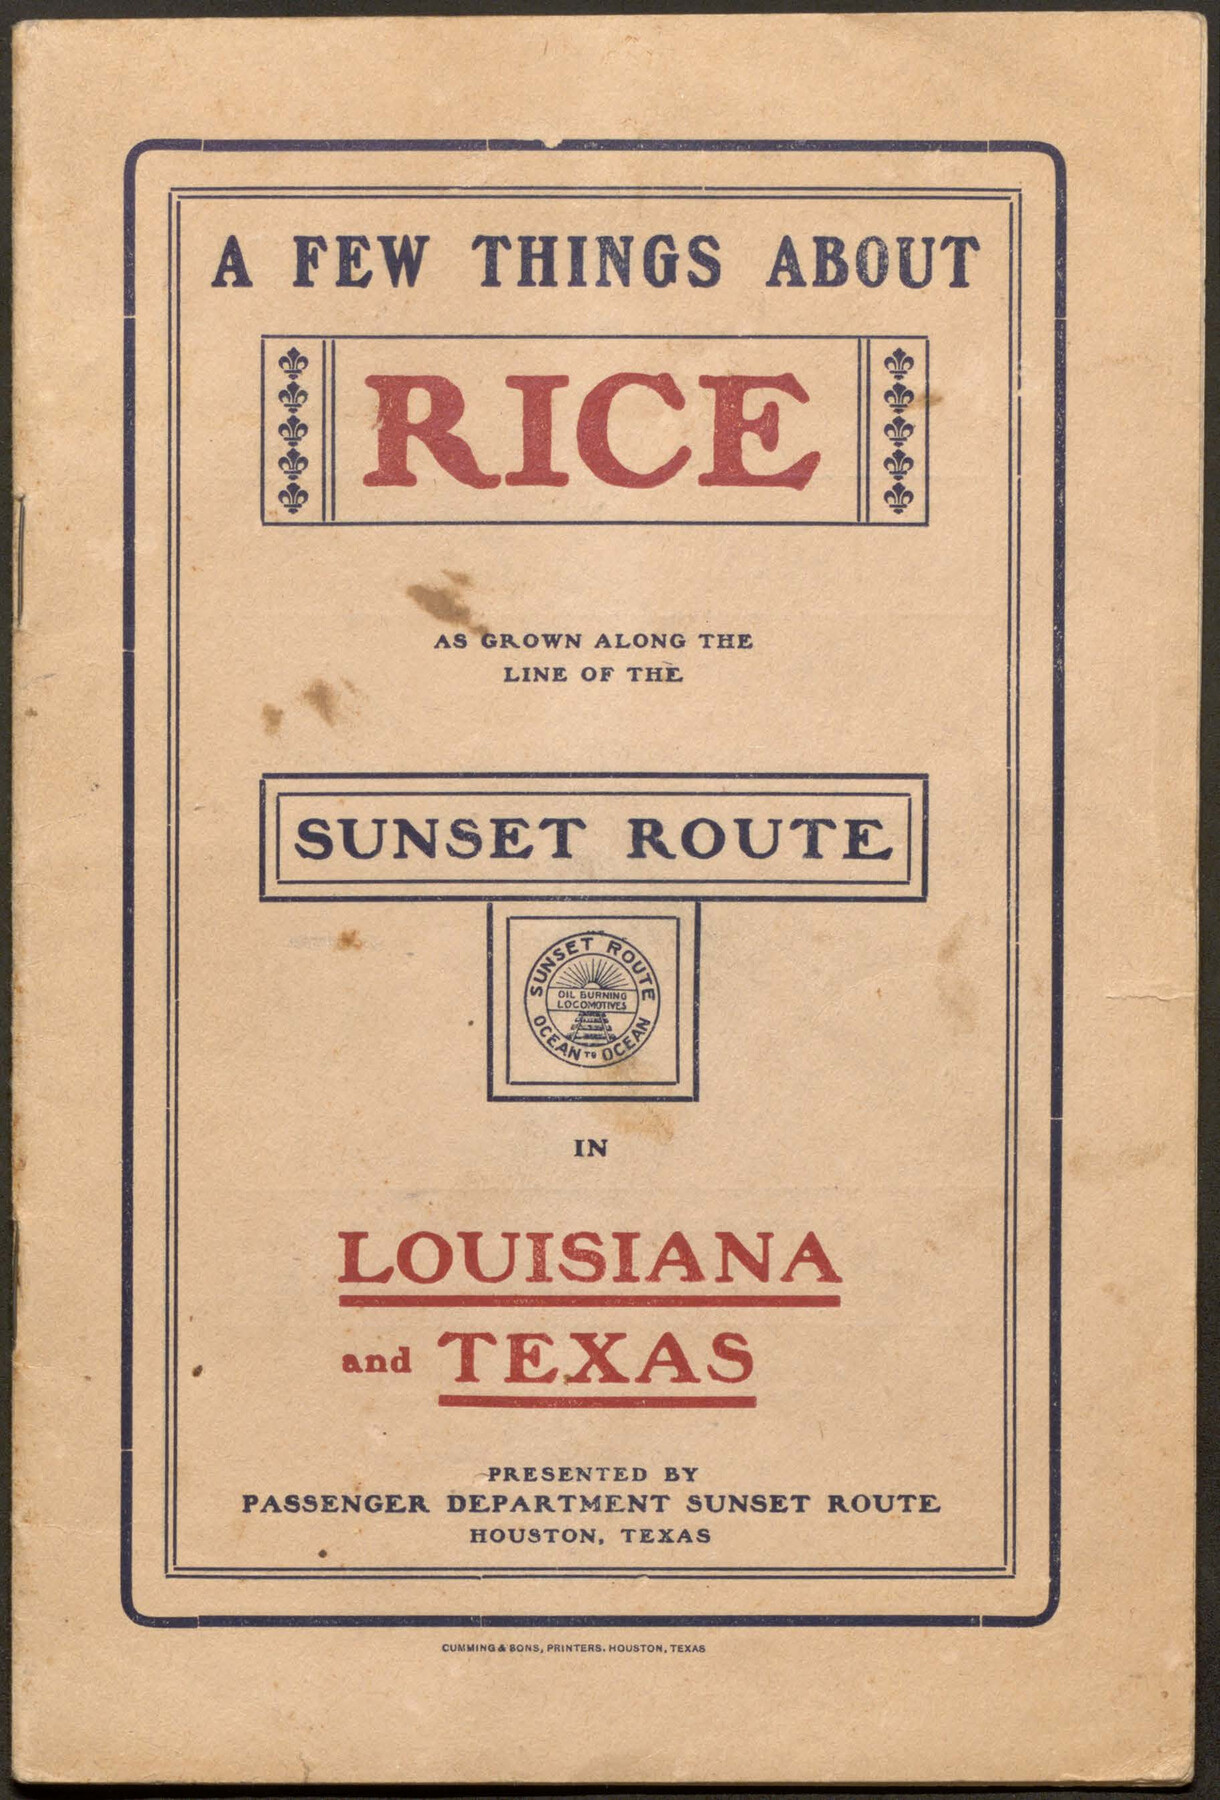 A Few Things About Rice as grown along the line of the Sunset Route in Louisiana and Texas